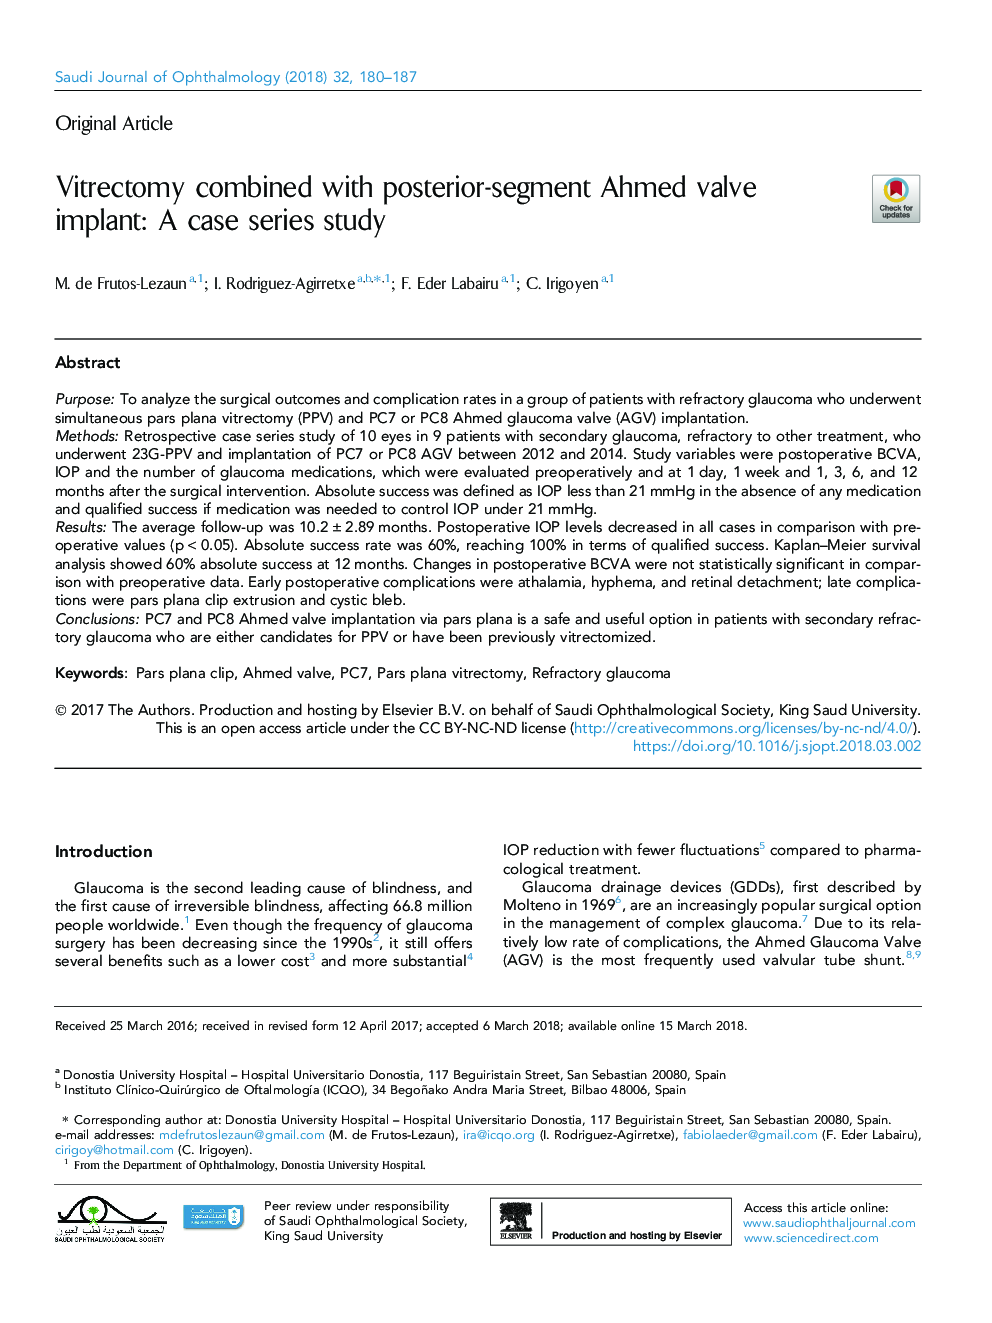 Vitrectomy combined with posterior-segment Ahmed valve implant: A case series study